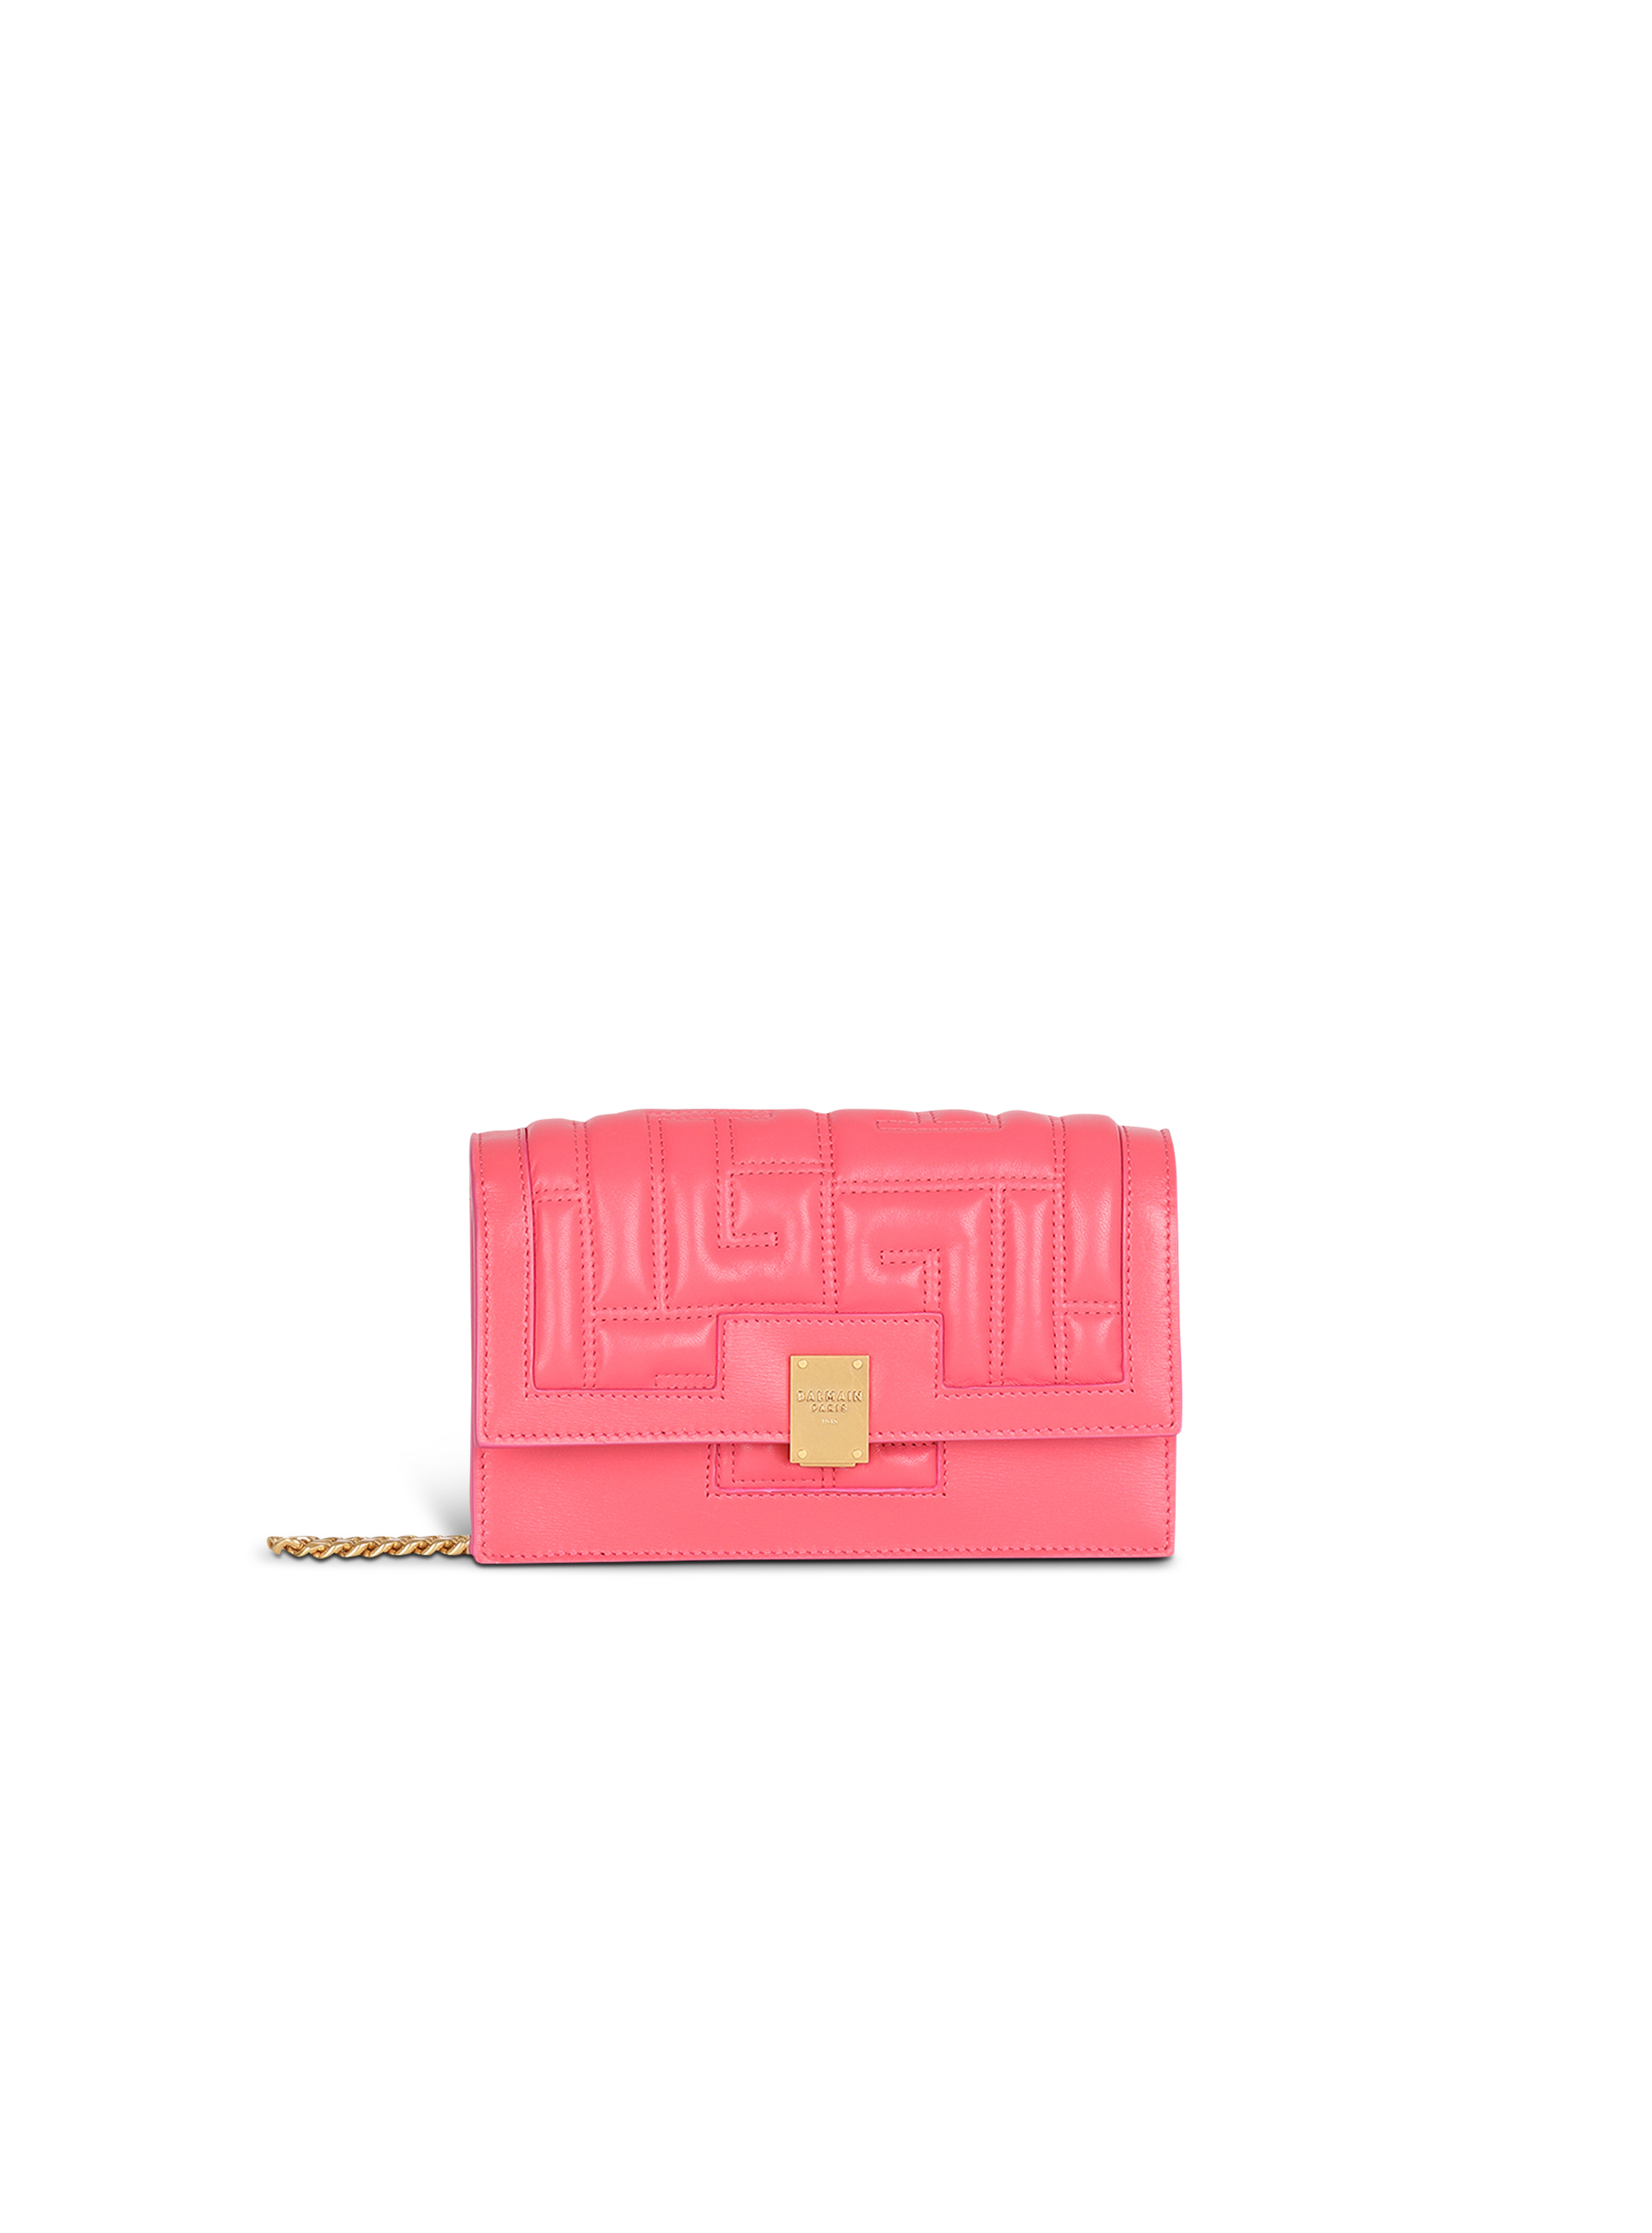 Mini-sized quilted leather 1945 bag, pink